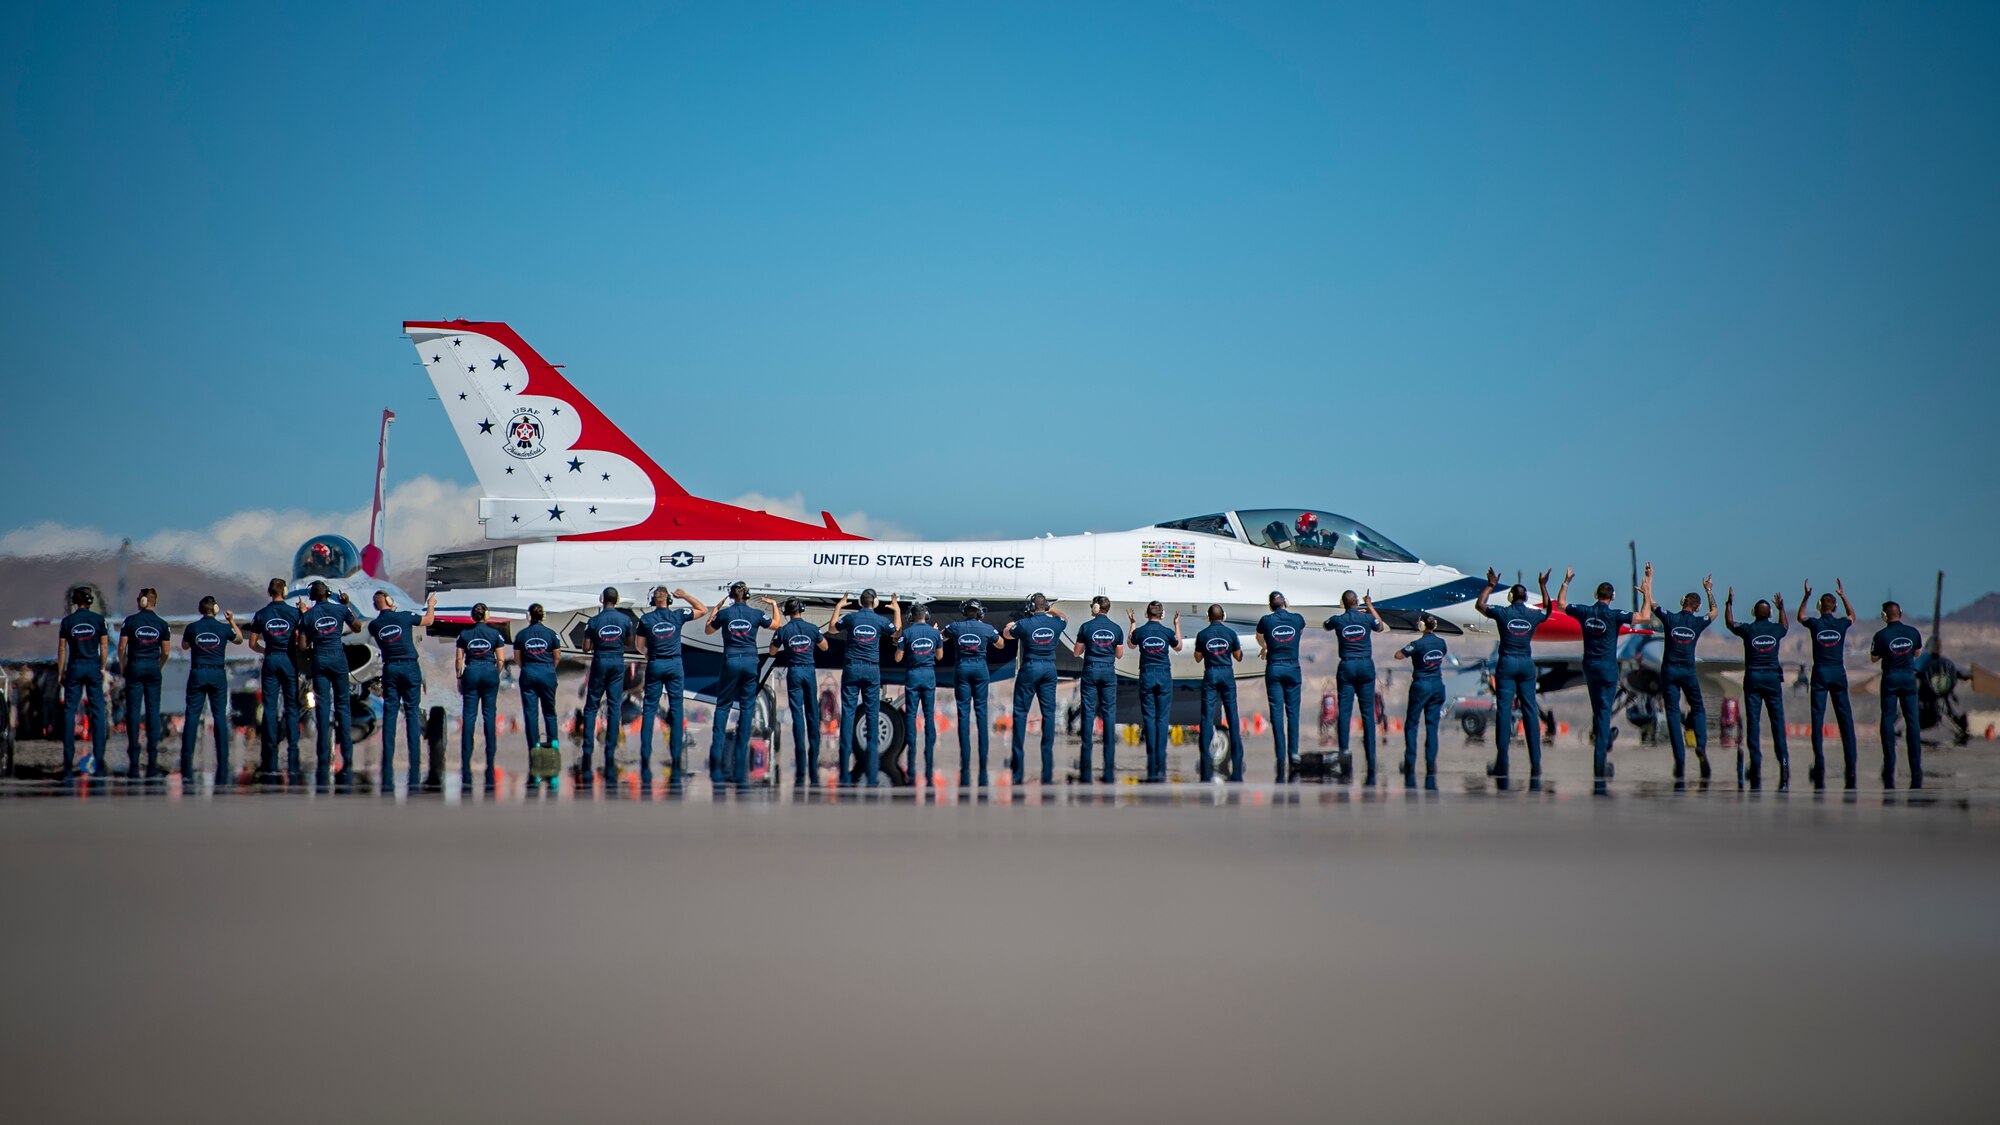 Thunderbird pilots stand on a flightine in front of a plane